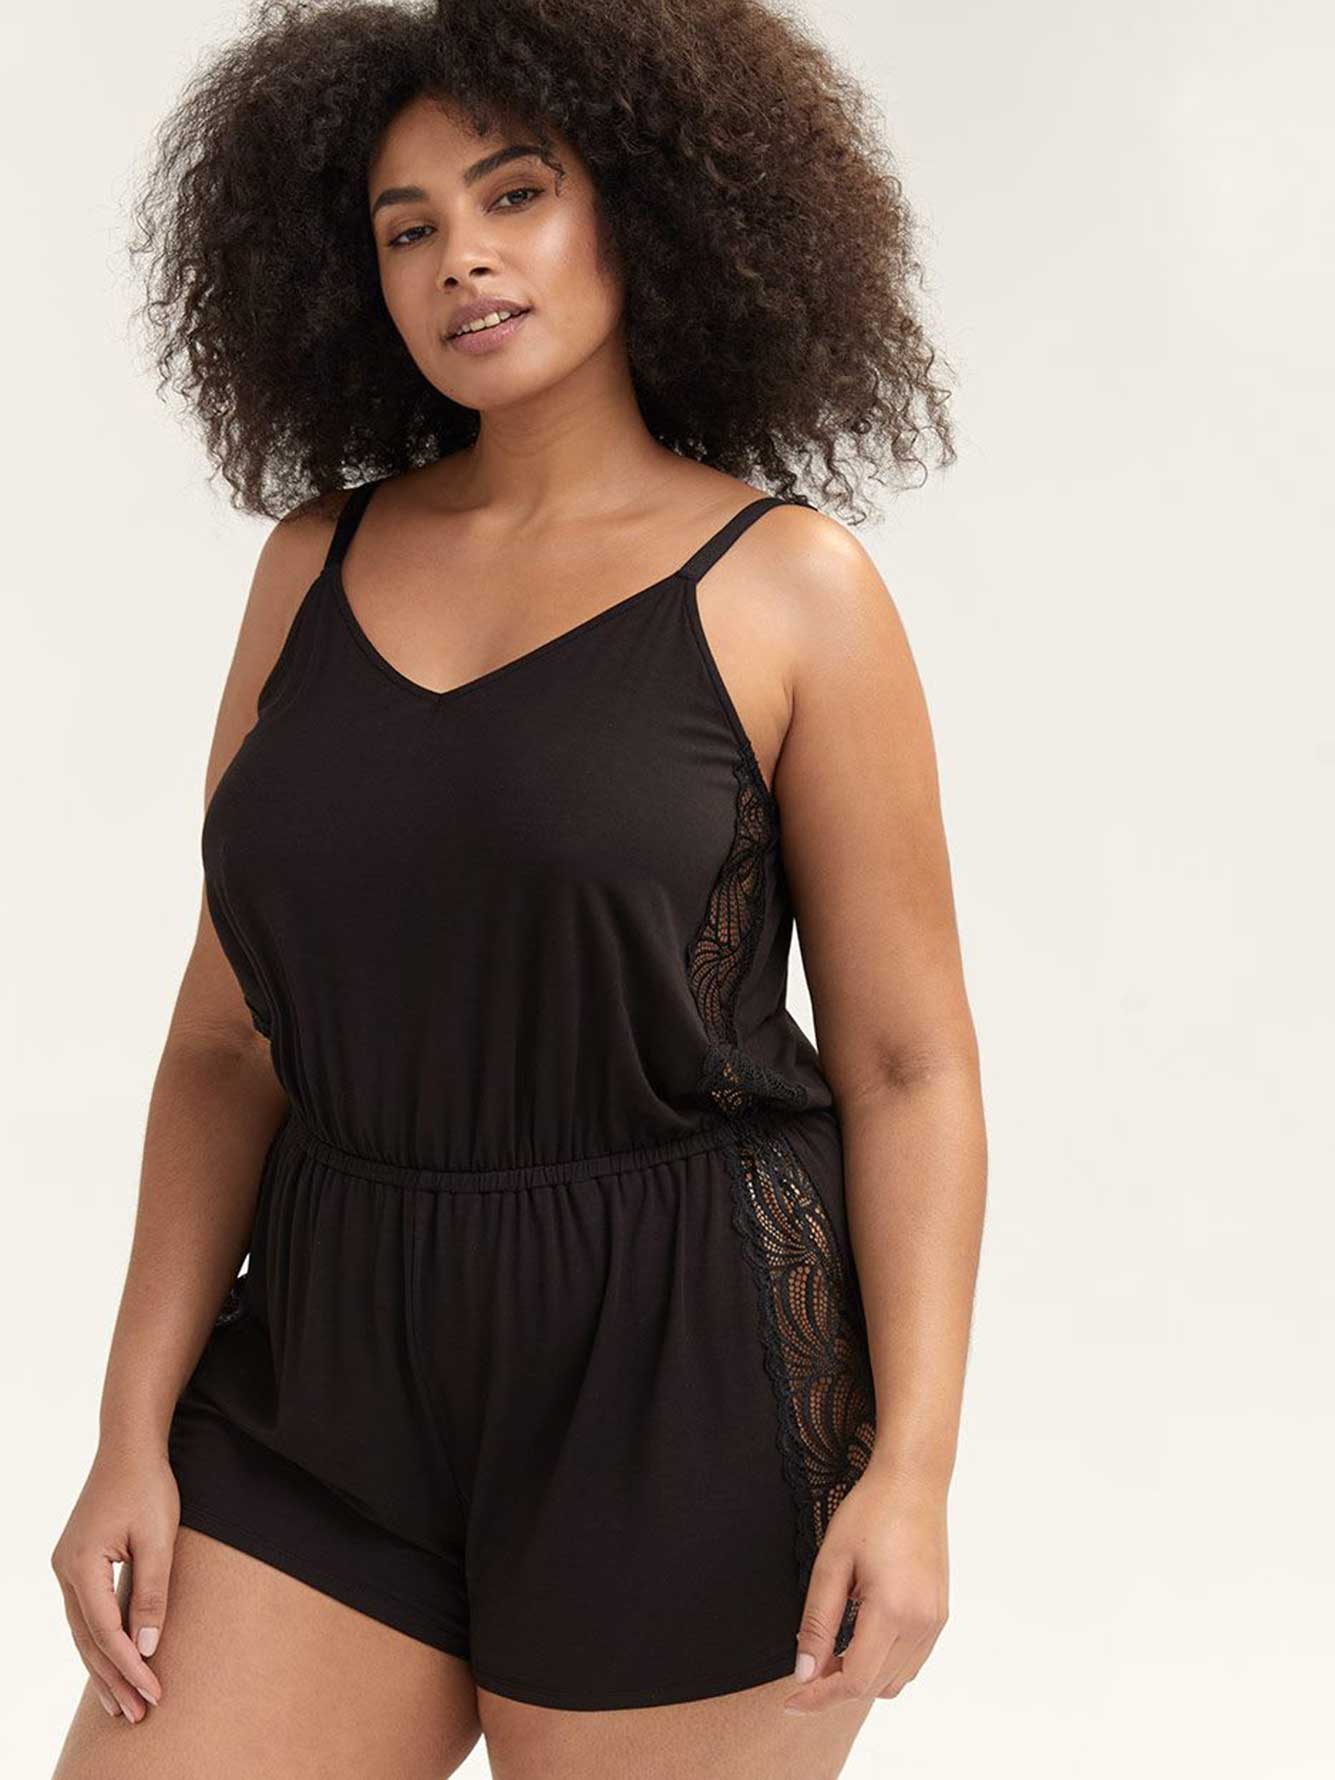 One-Piece Romper with Lace Details - Ashley Graham